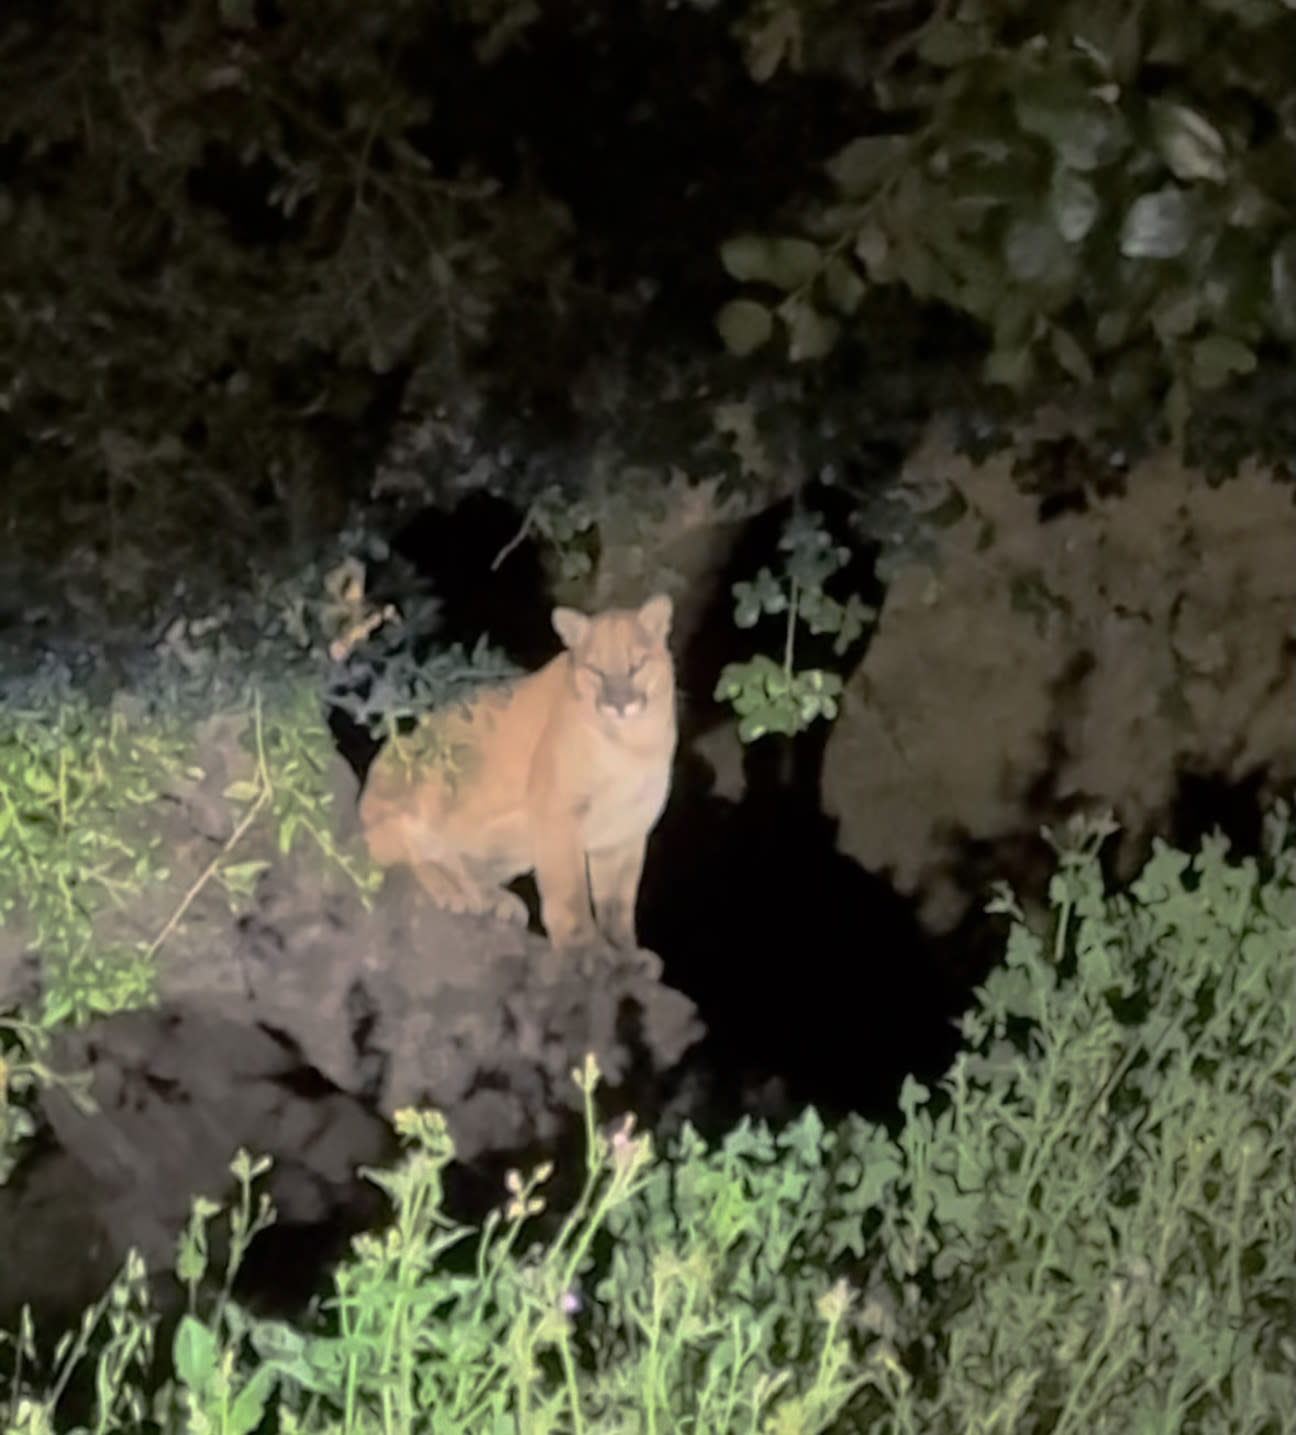 Unconfirmed sighting of mountain lion in Griffith Park recalls L.A.'s favorite big cat, P-22